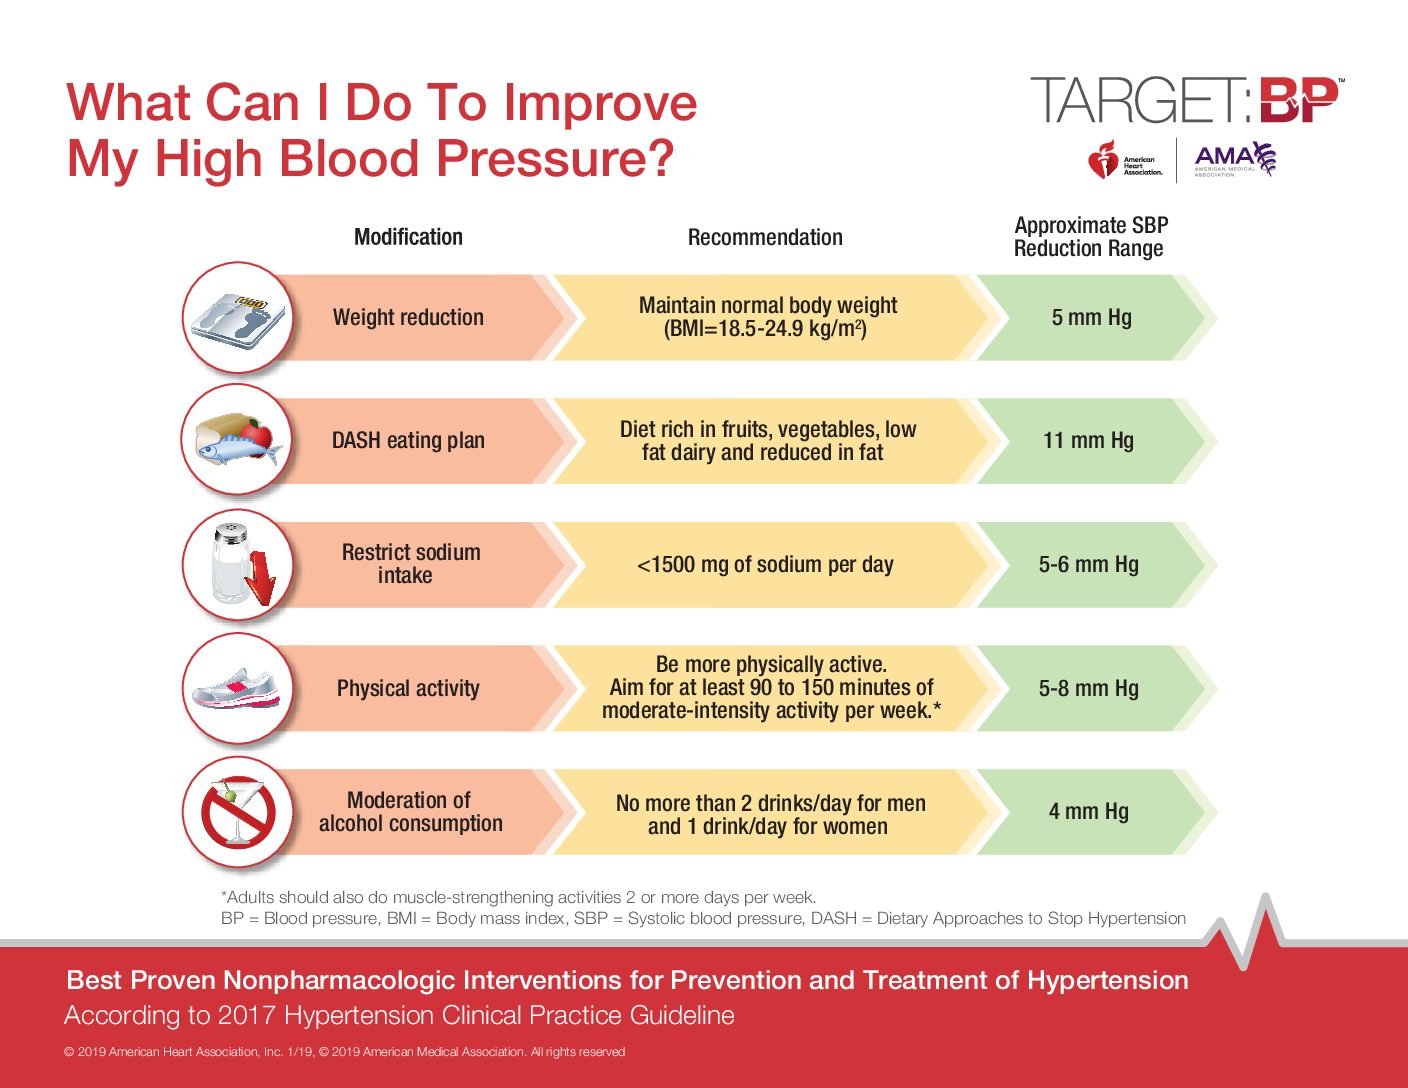 What Can I Do To Improve My High Blood Pressure?